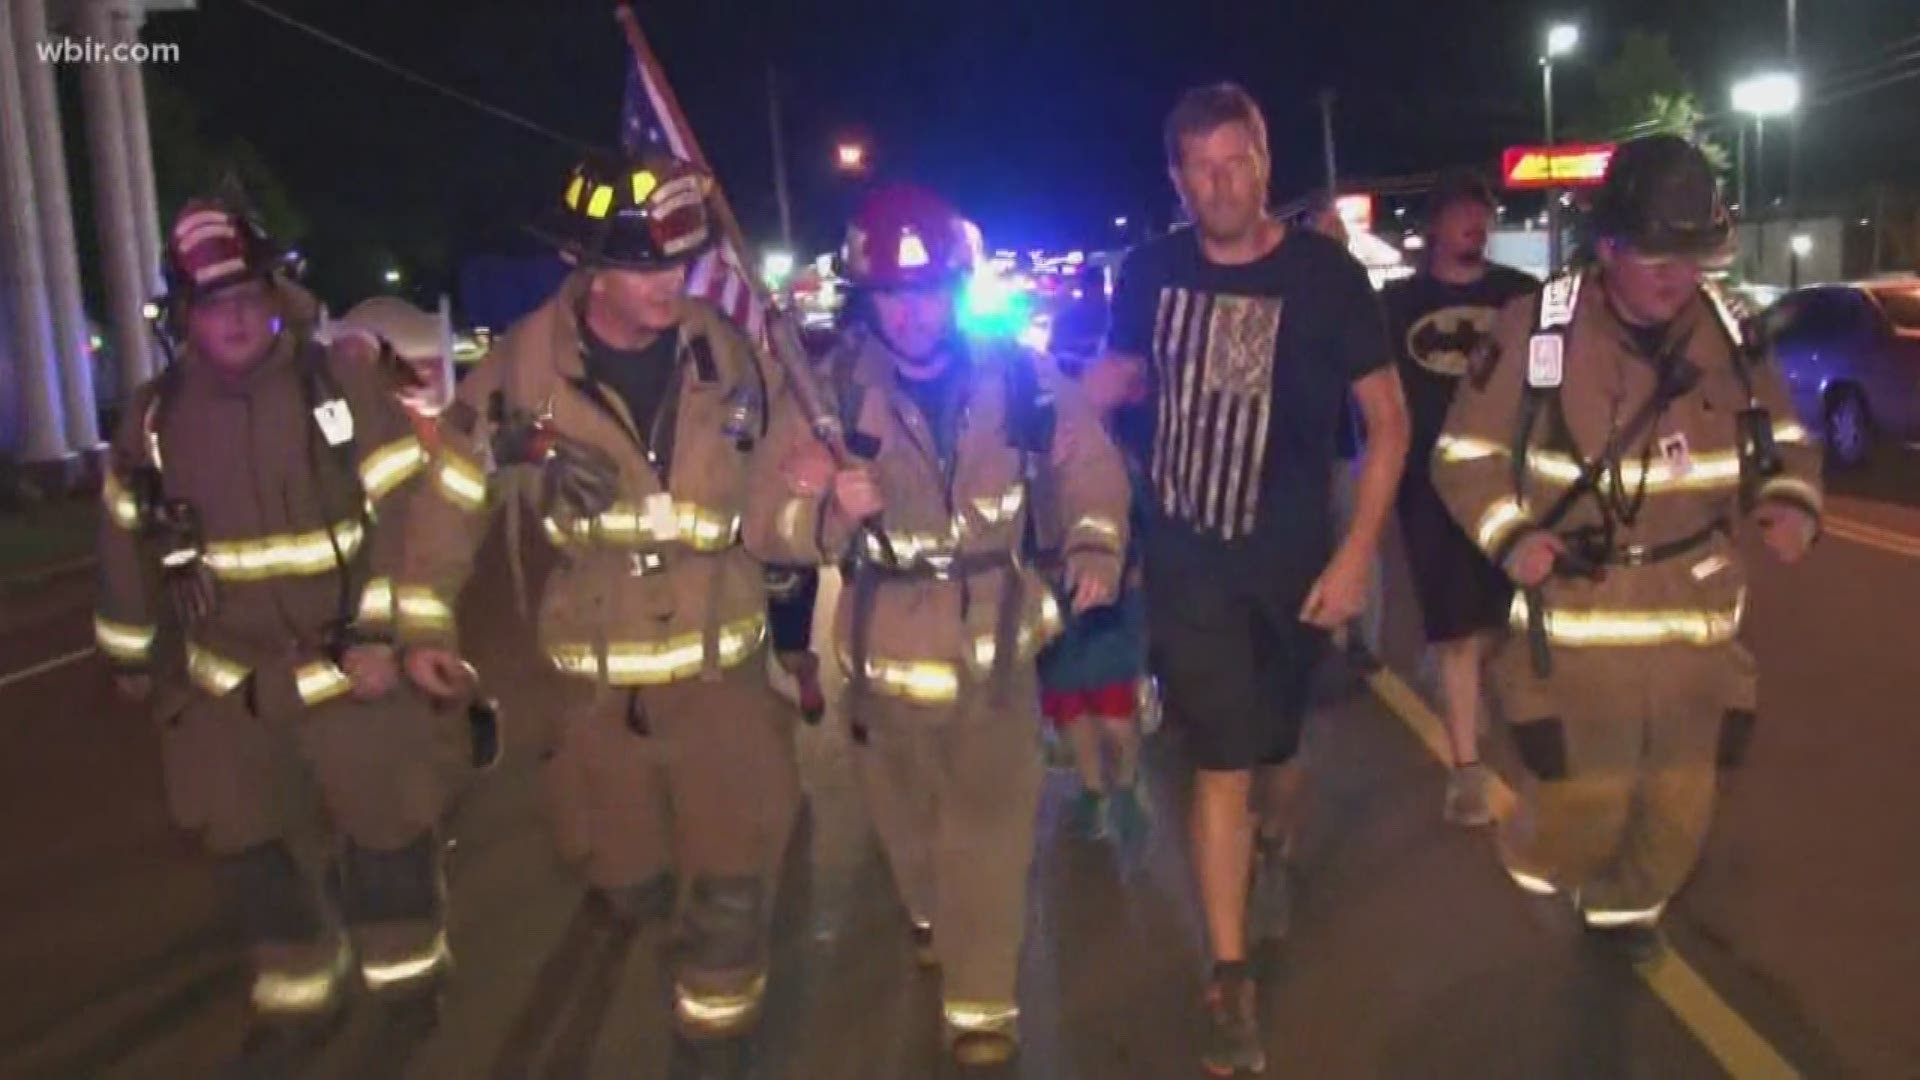 An East Tennessee man honored victims from the 9/11 attacks by running all day in full firefighter gear.